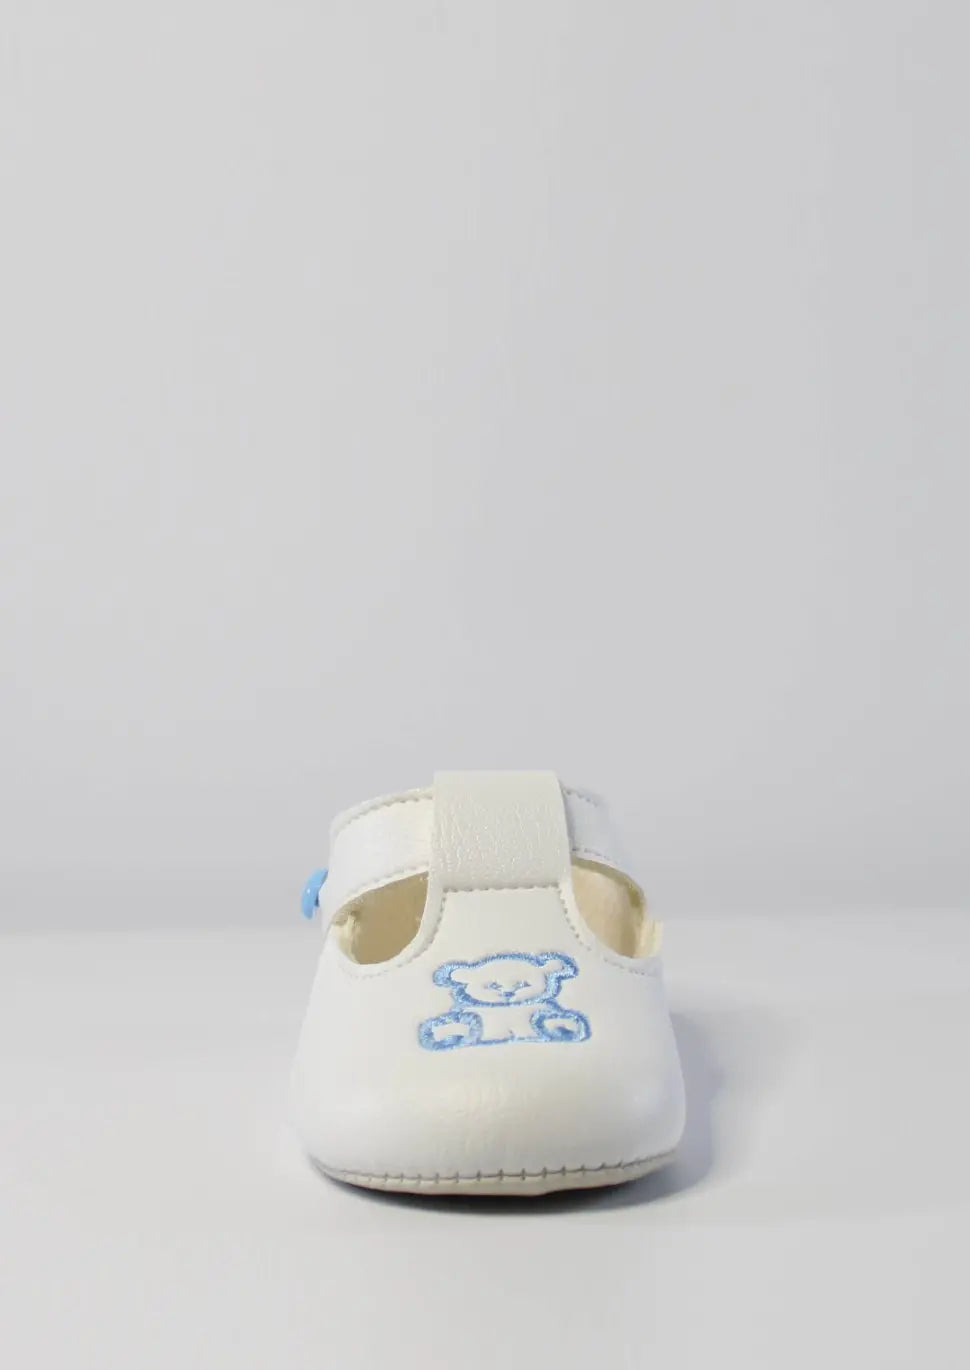 White Teddy Motif baypod Shoes available at tors childrens wear